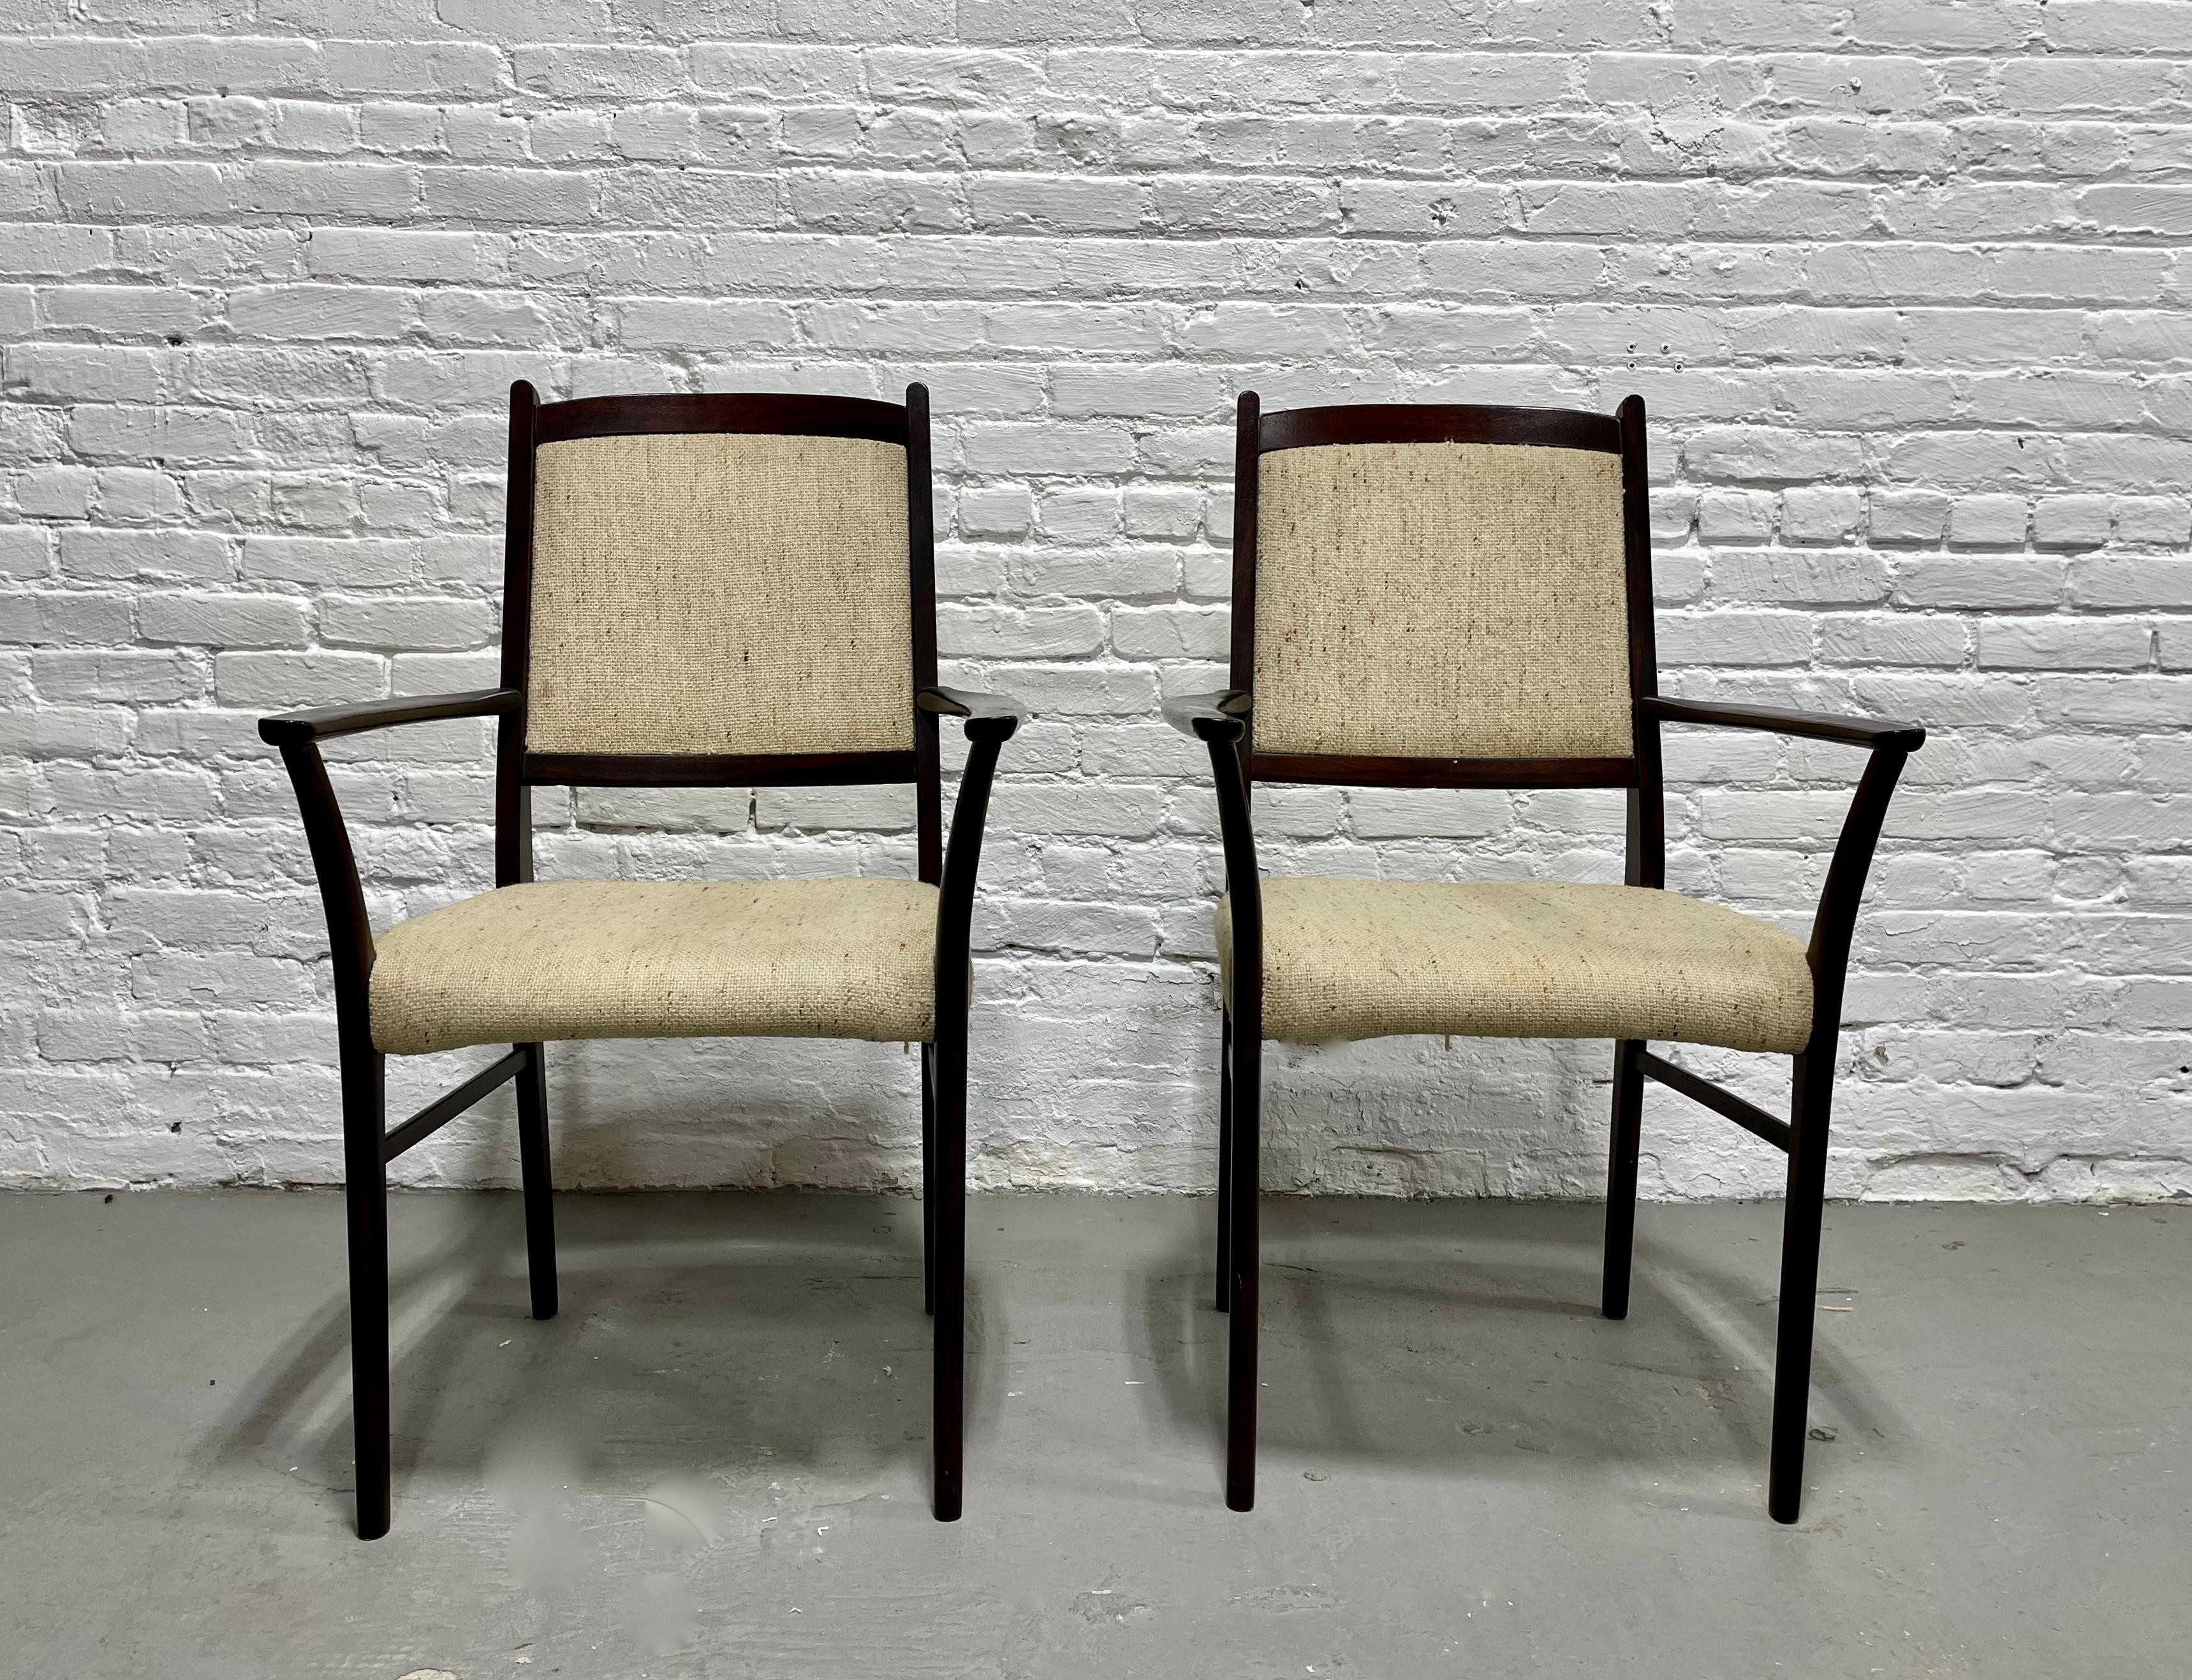 Pair of Danish Mid Century Modern Rosewood Dining Chairs, c. 1960's.  Simple, clean lines + perfect design featuring lovely oatmeal upholstery. Constructed in rosewood and its deep, rich color and stunning wood grains will add depth and design to